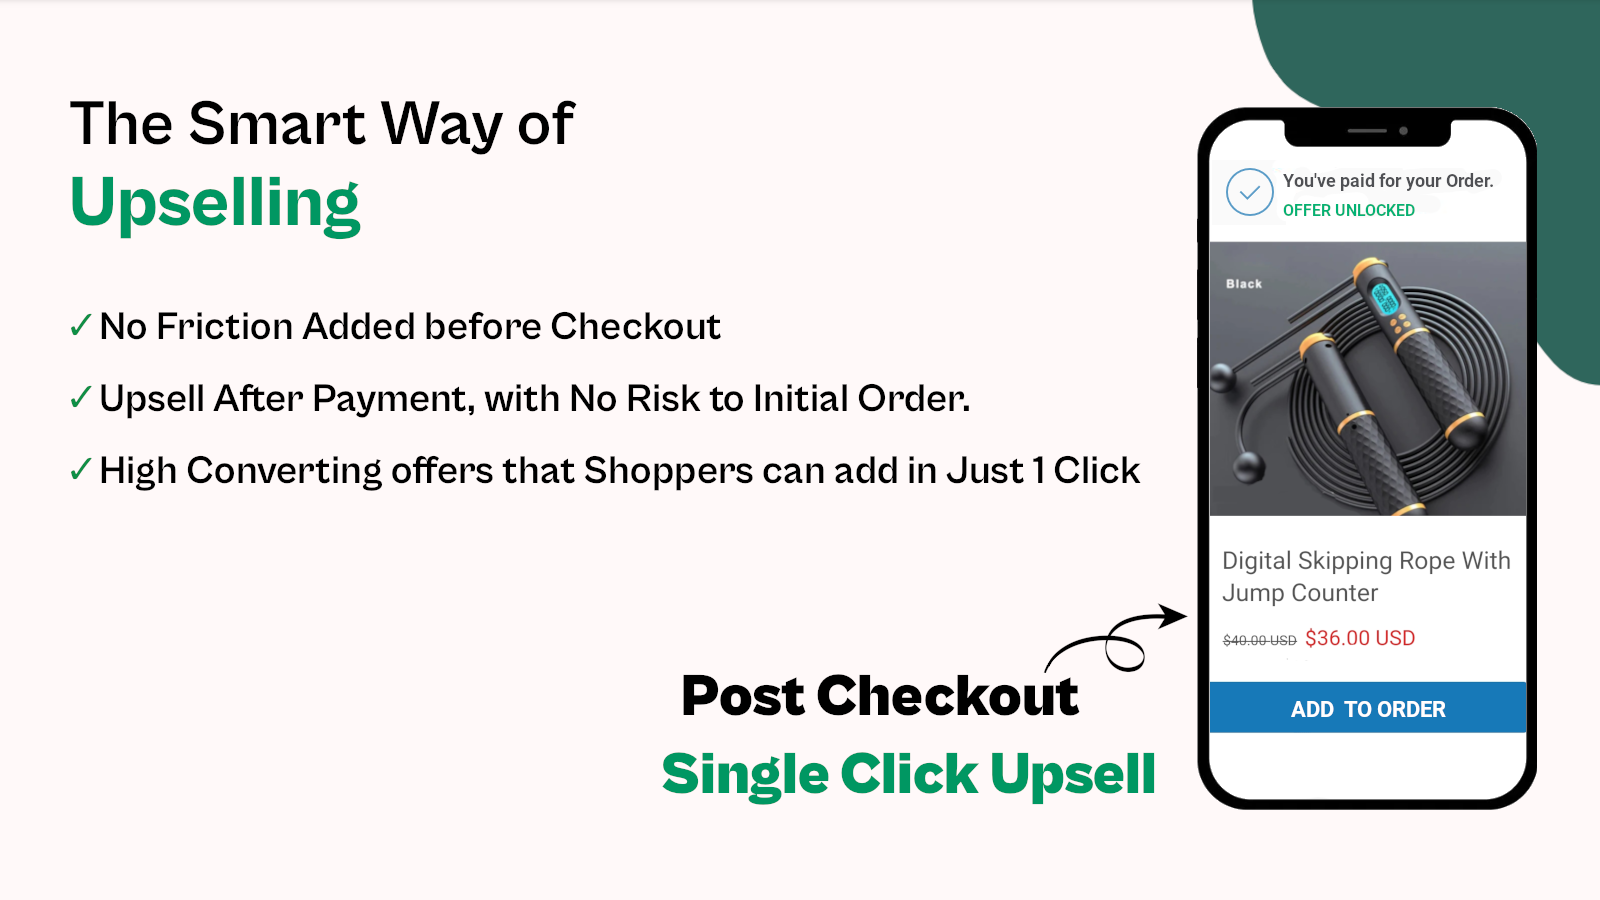 High Converting Post Checkout One Click Upsell Offers